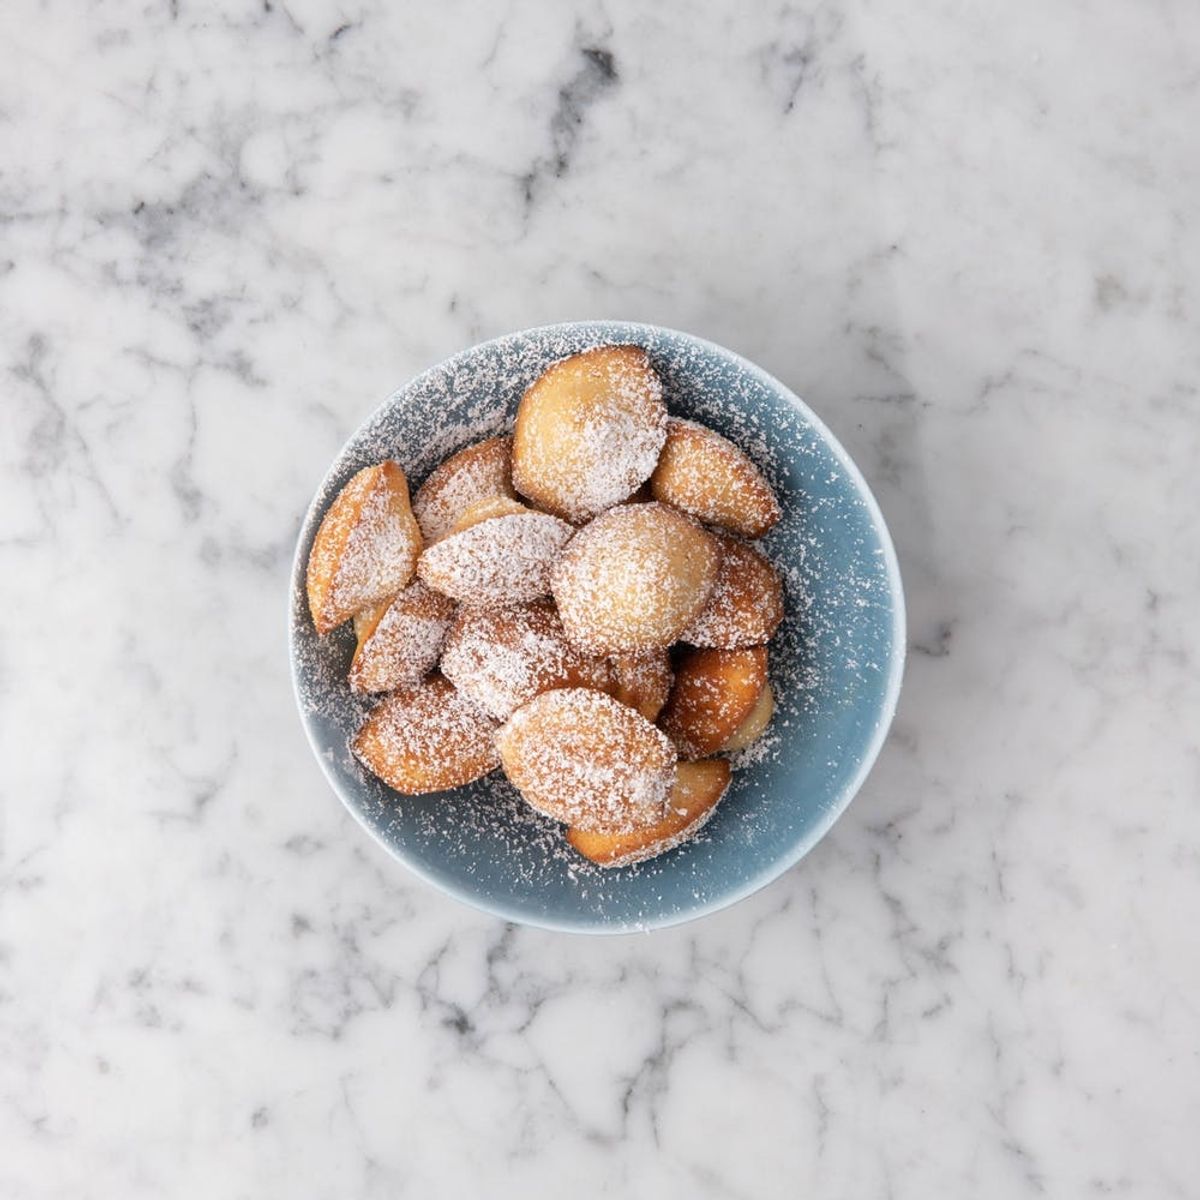 Dominique Ansel’s Mini Madeleines Bake in Just 4 Minutes